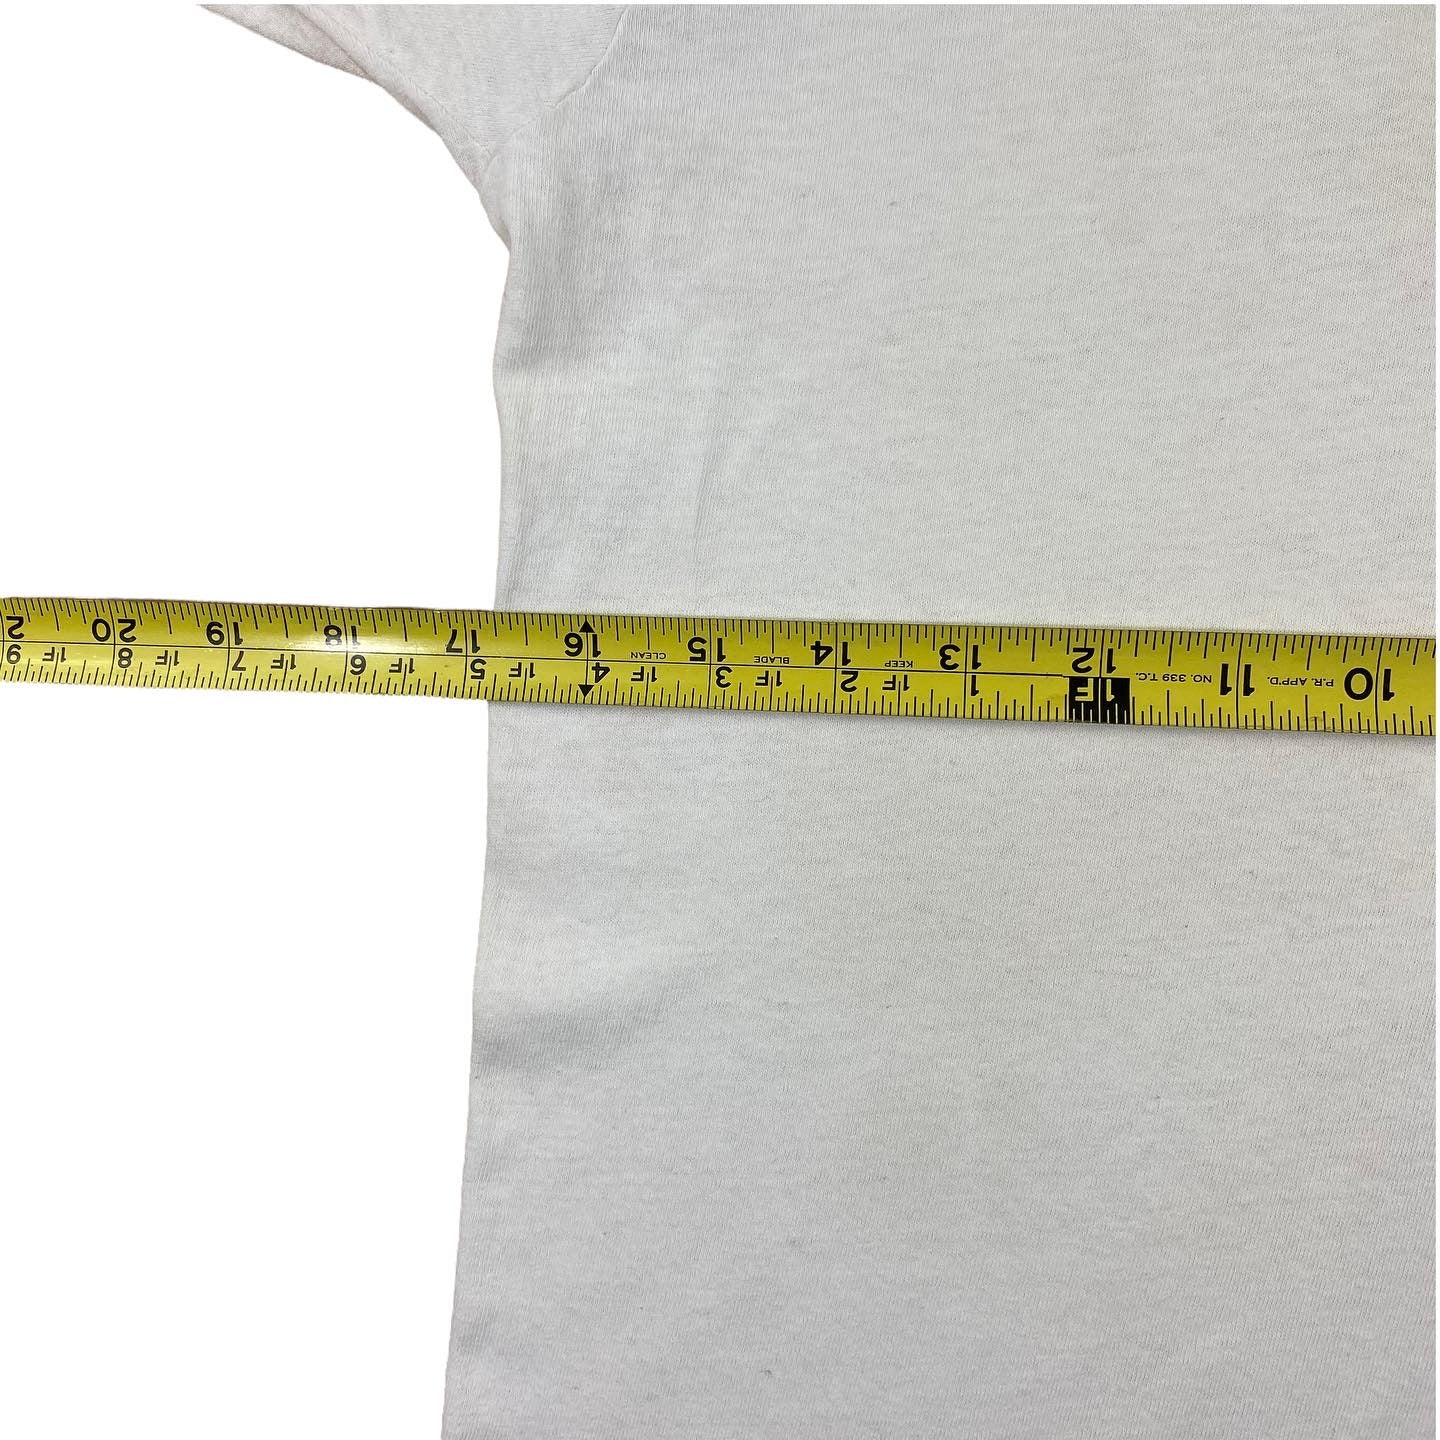 80s Blank white tee. Small